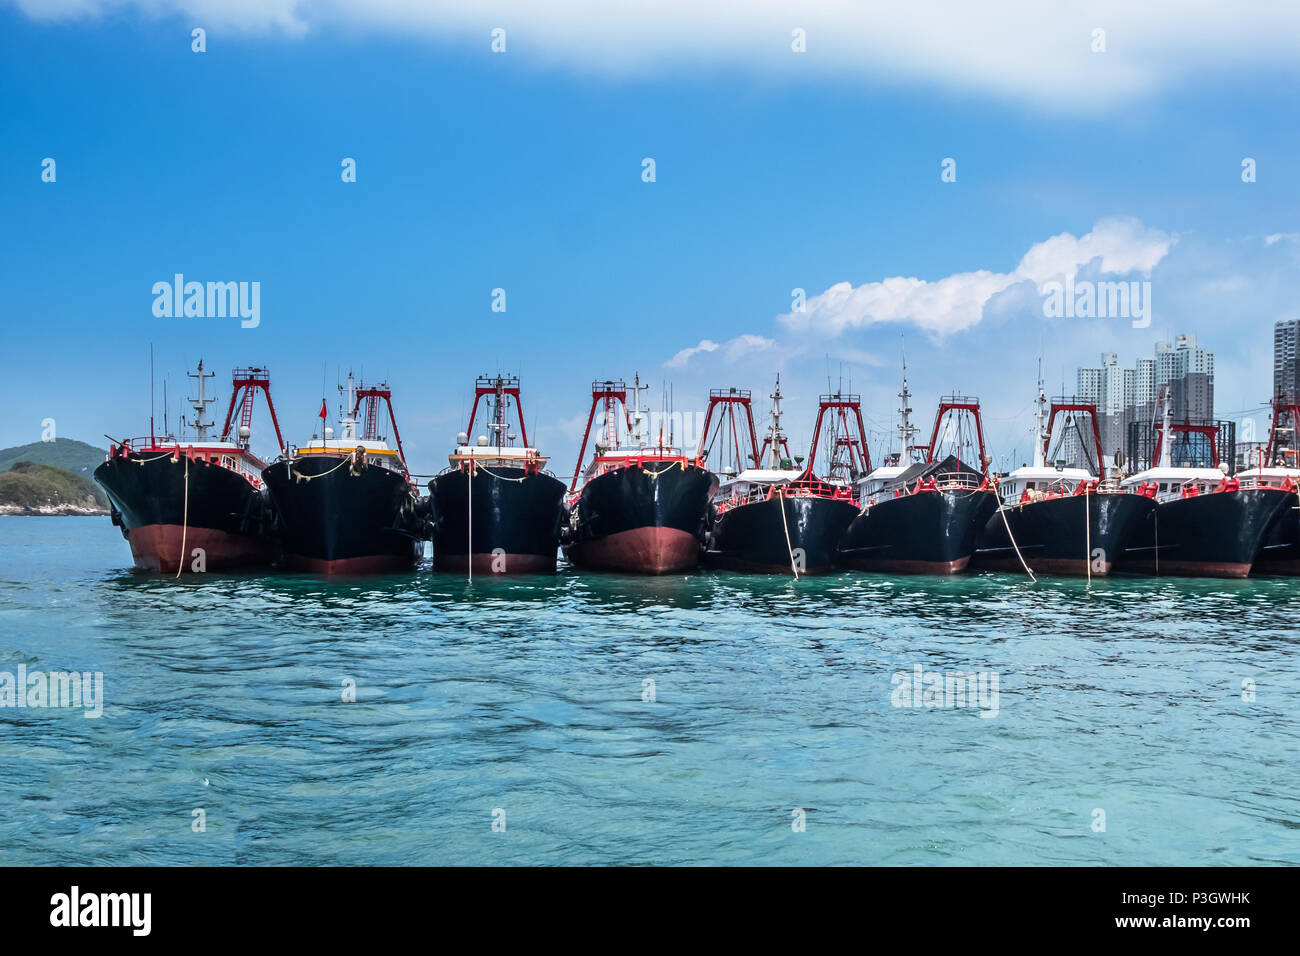 Fishing trawlers anchored in Aberdeen Bay, Hong Kong. Modern nautical vessels in fish industry. Stock Photo